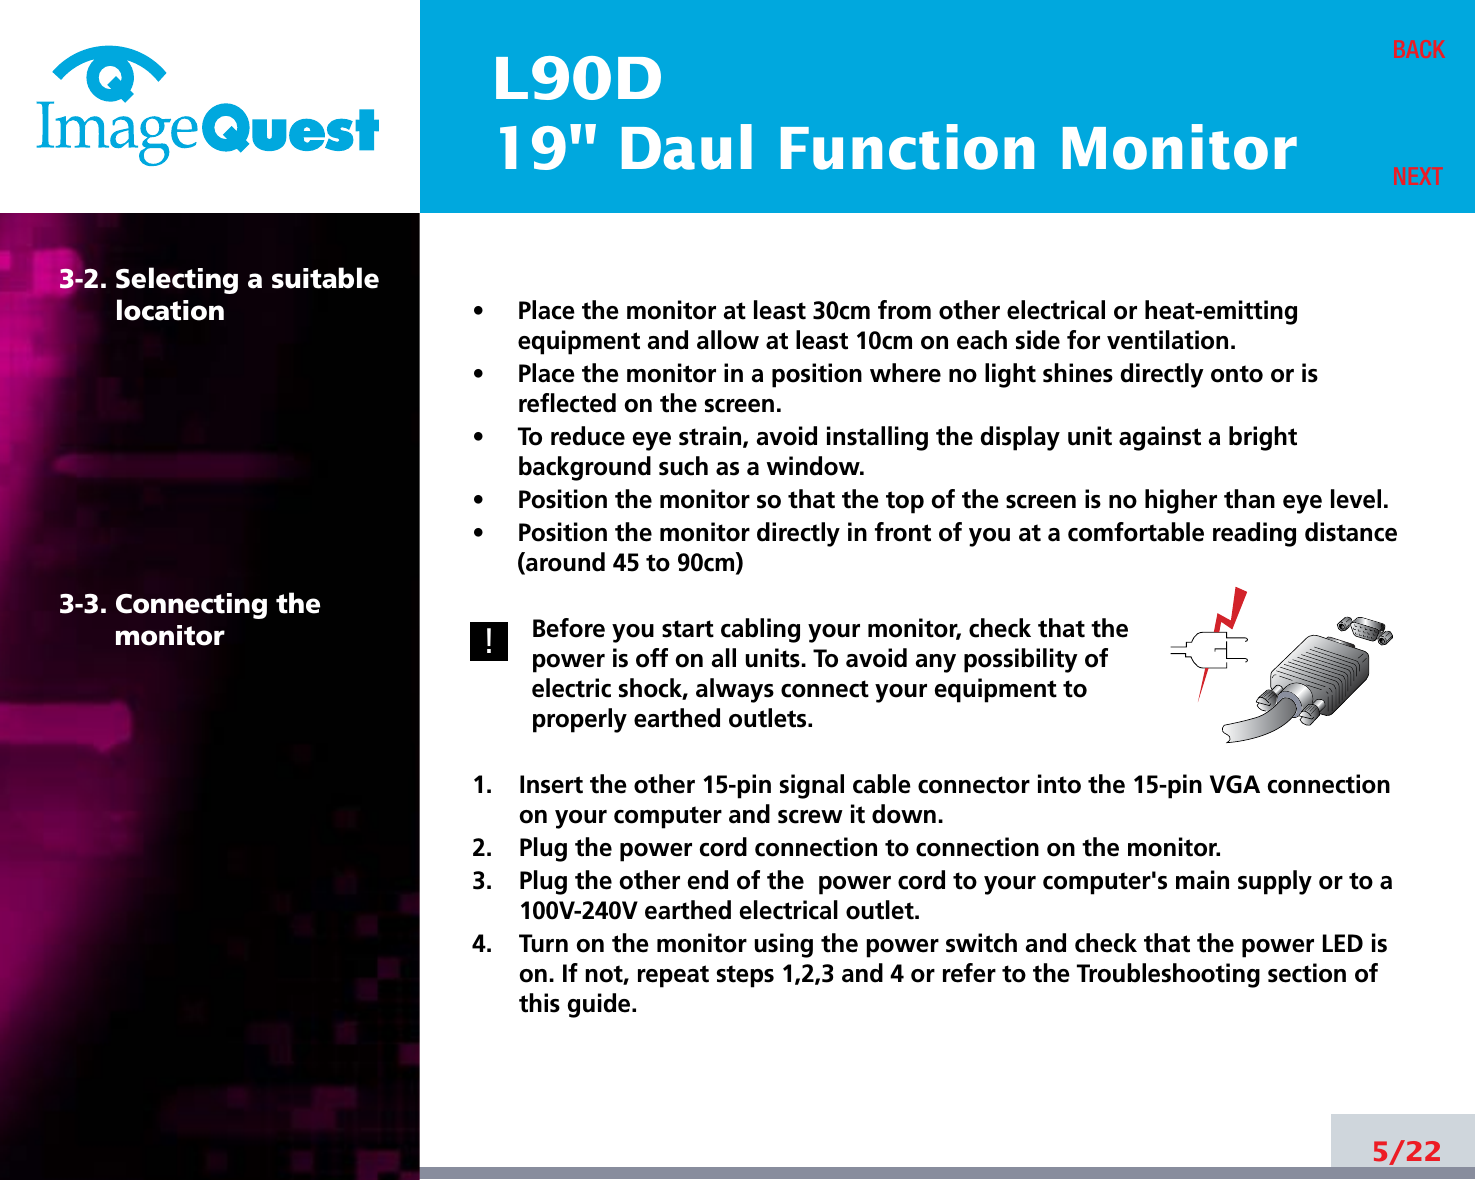 L90D19&quot; Daul Function Monitor5/22BACKNEXT3-2. Selecting a suitablelocation3-3. Connecting the monitor•     Place the monitor at least 30cm from other electrical or heat-emittingequipment and allow at least 10cm on each side for ventilation.•     Place the monitor in a position where no light shines directly onto or isreflected on the screen.•     To reduce eye strain, avoid installing the display unit against a brightbackground such as a window.•     Position the monitor so that the top of the screen is no higher than eye level.•     Position the monitor directly in front of you at a comfortable reading distance(around 45 to 90cm) Before you start cabling your monitor, check that thepower is off on all units. To avoid any possibility ofelectric shock, always connect your equipment toproperly earthed outlets.1.    Insert the other 15-pin signal cable connector into the 15-pin VGA connectionon your computer and screw it down. 2.    Plug the power cord connection to connection on the monitor.3.    Plug the other end of the  power cord to your computer&apos;s main supply or to a100V-240V earthed electrical outlet.4.    Turn on the monitor using the power switch and check that the power LED ison. If not, repeat steps 1,2,3 and 4 or refer to the Troubleshooting section ofthis guide.!!